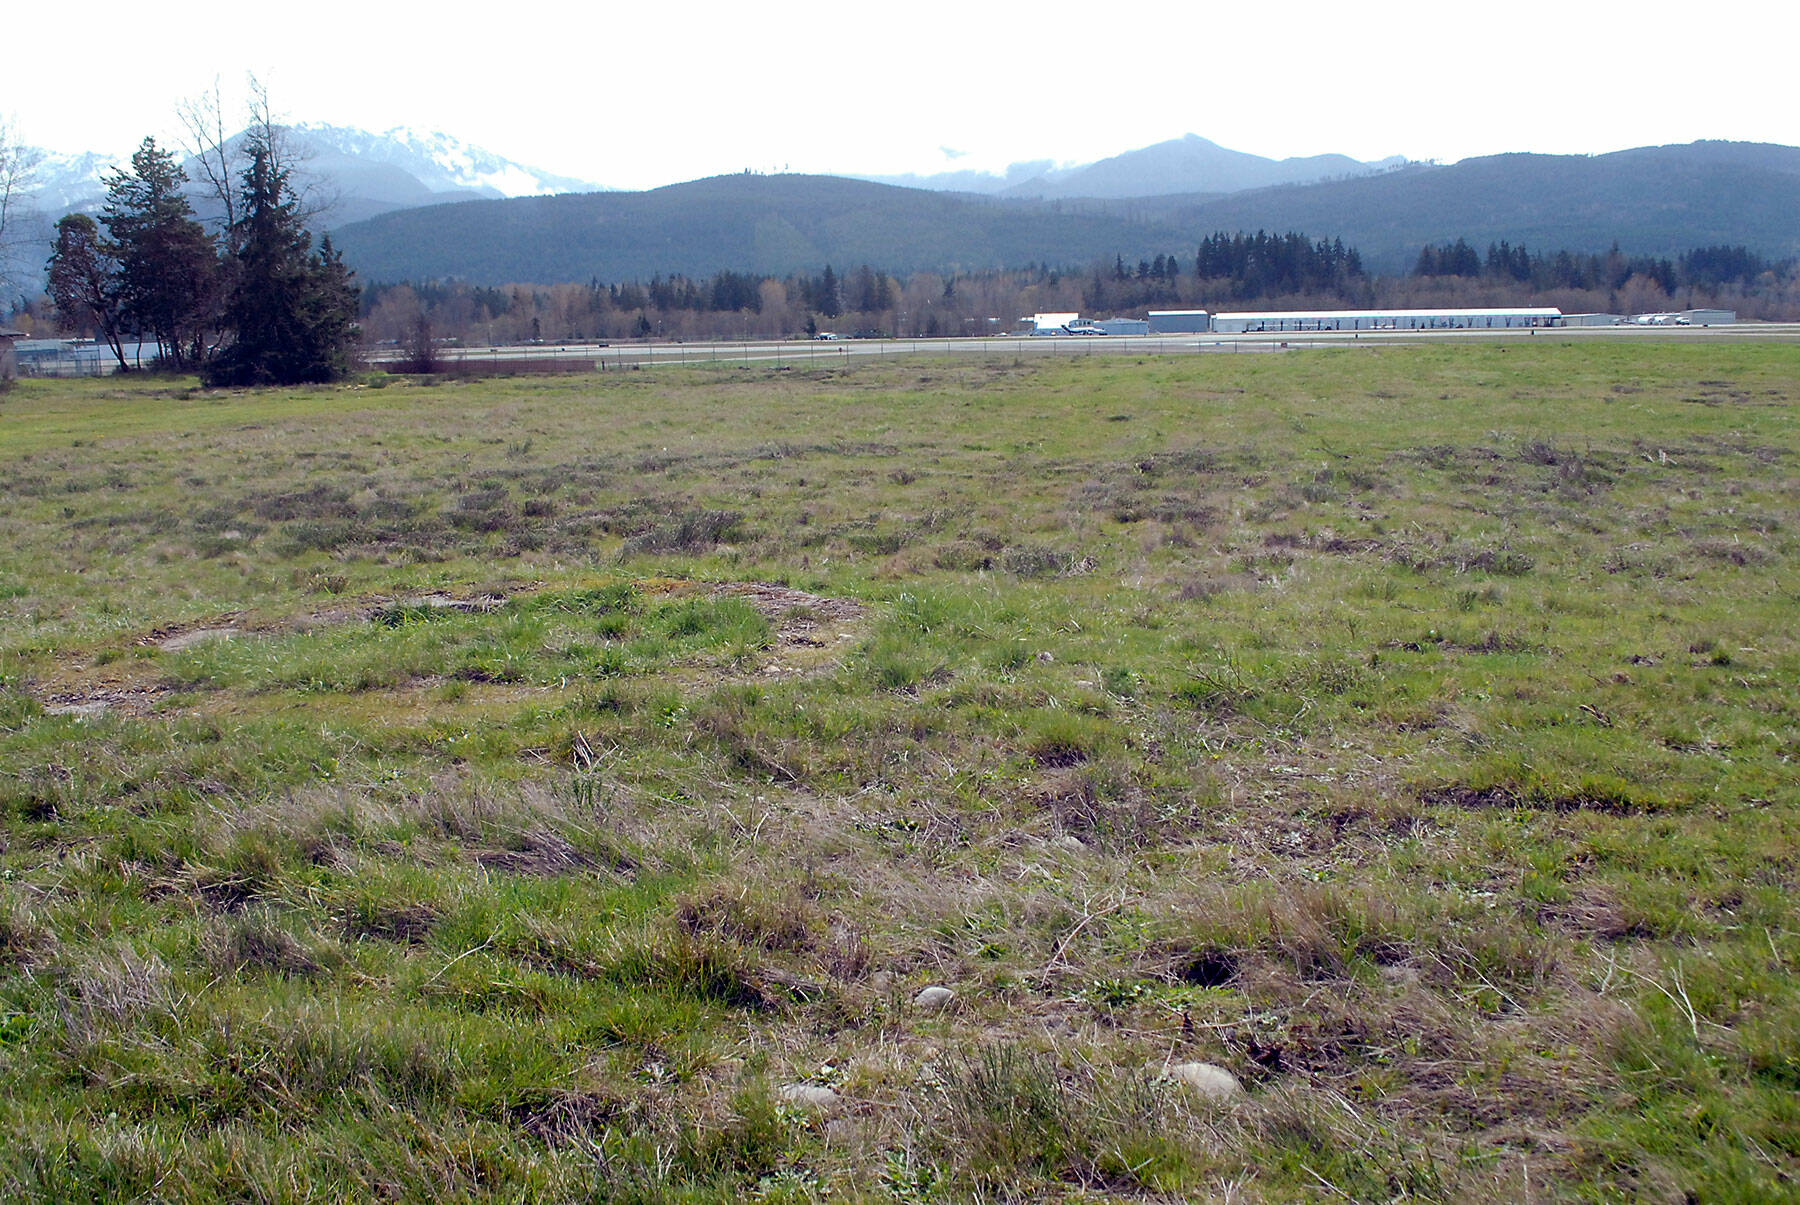 Photo by Keith Thorpe/Olympic Peninsula News Group
An empty spot of land near 19th and O streets next to William R. Fairchild International Airport in Port Angeles, shown on April 6, is under consideration for construction of a Joint Public Safety Facility.